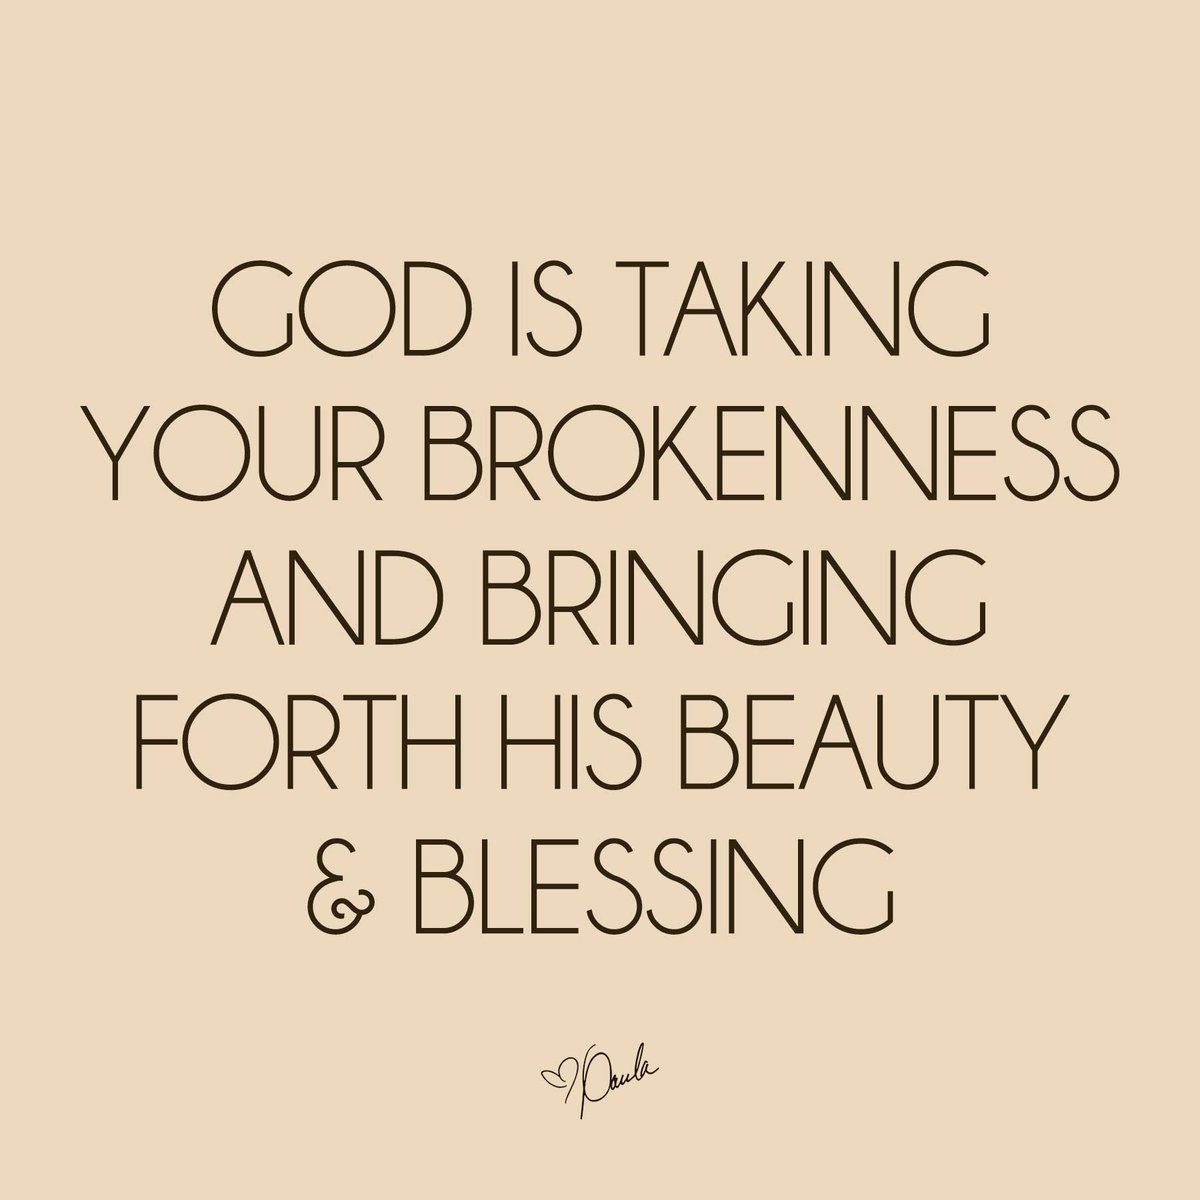 God is taking your brokenness and bringing forth His beauty & blessing!